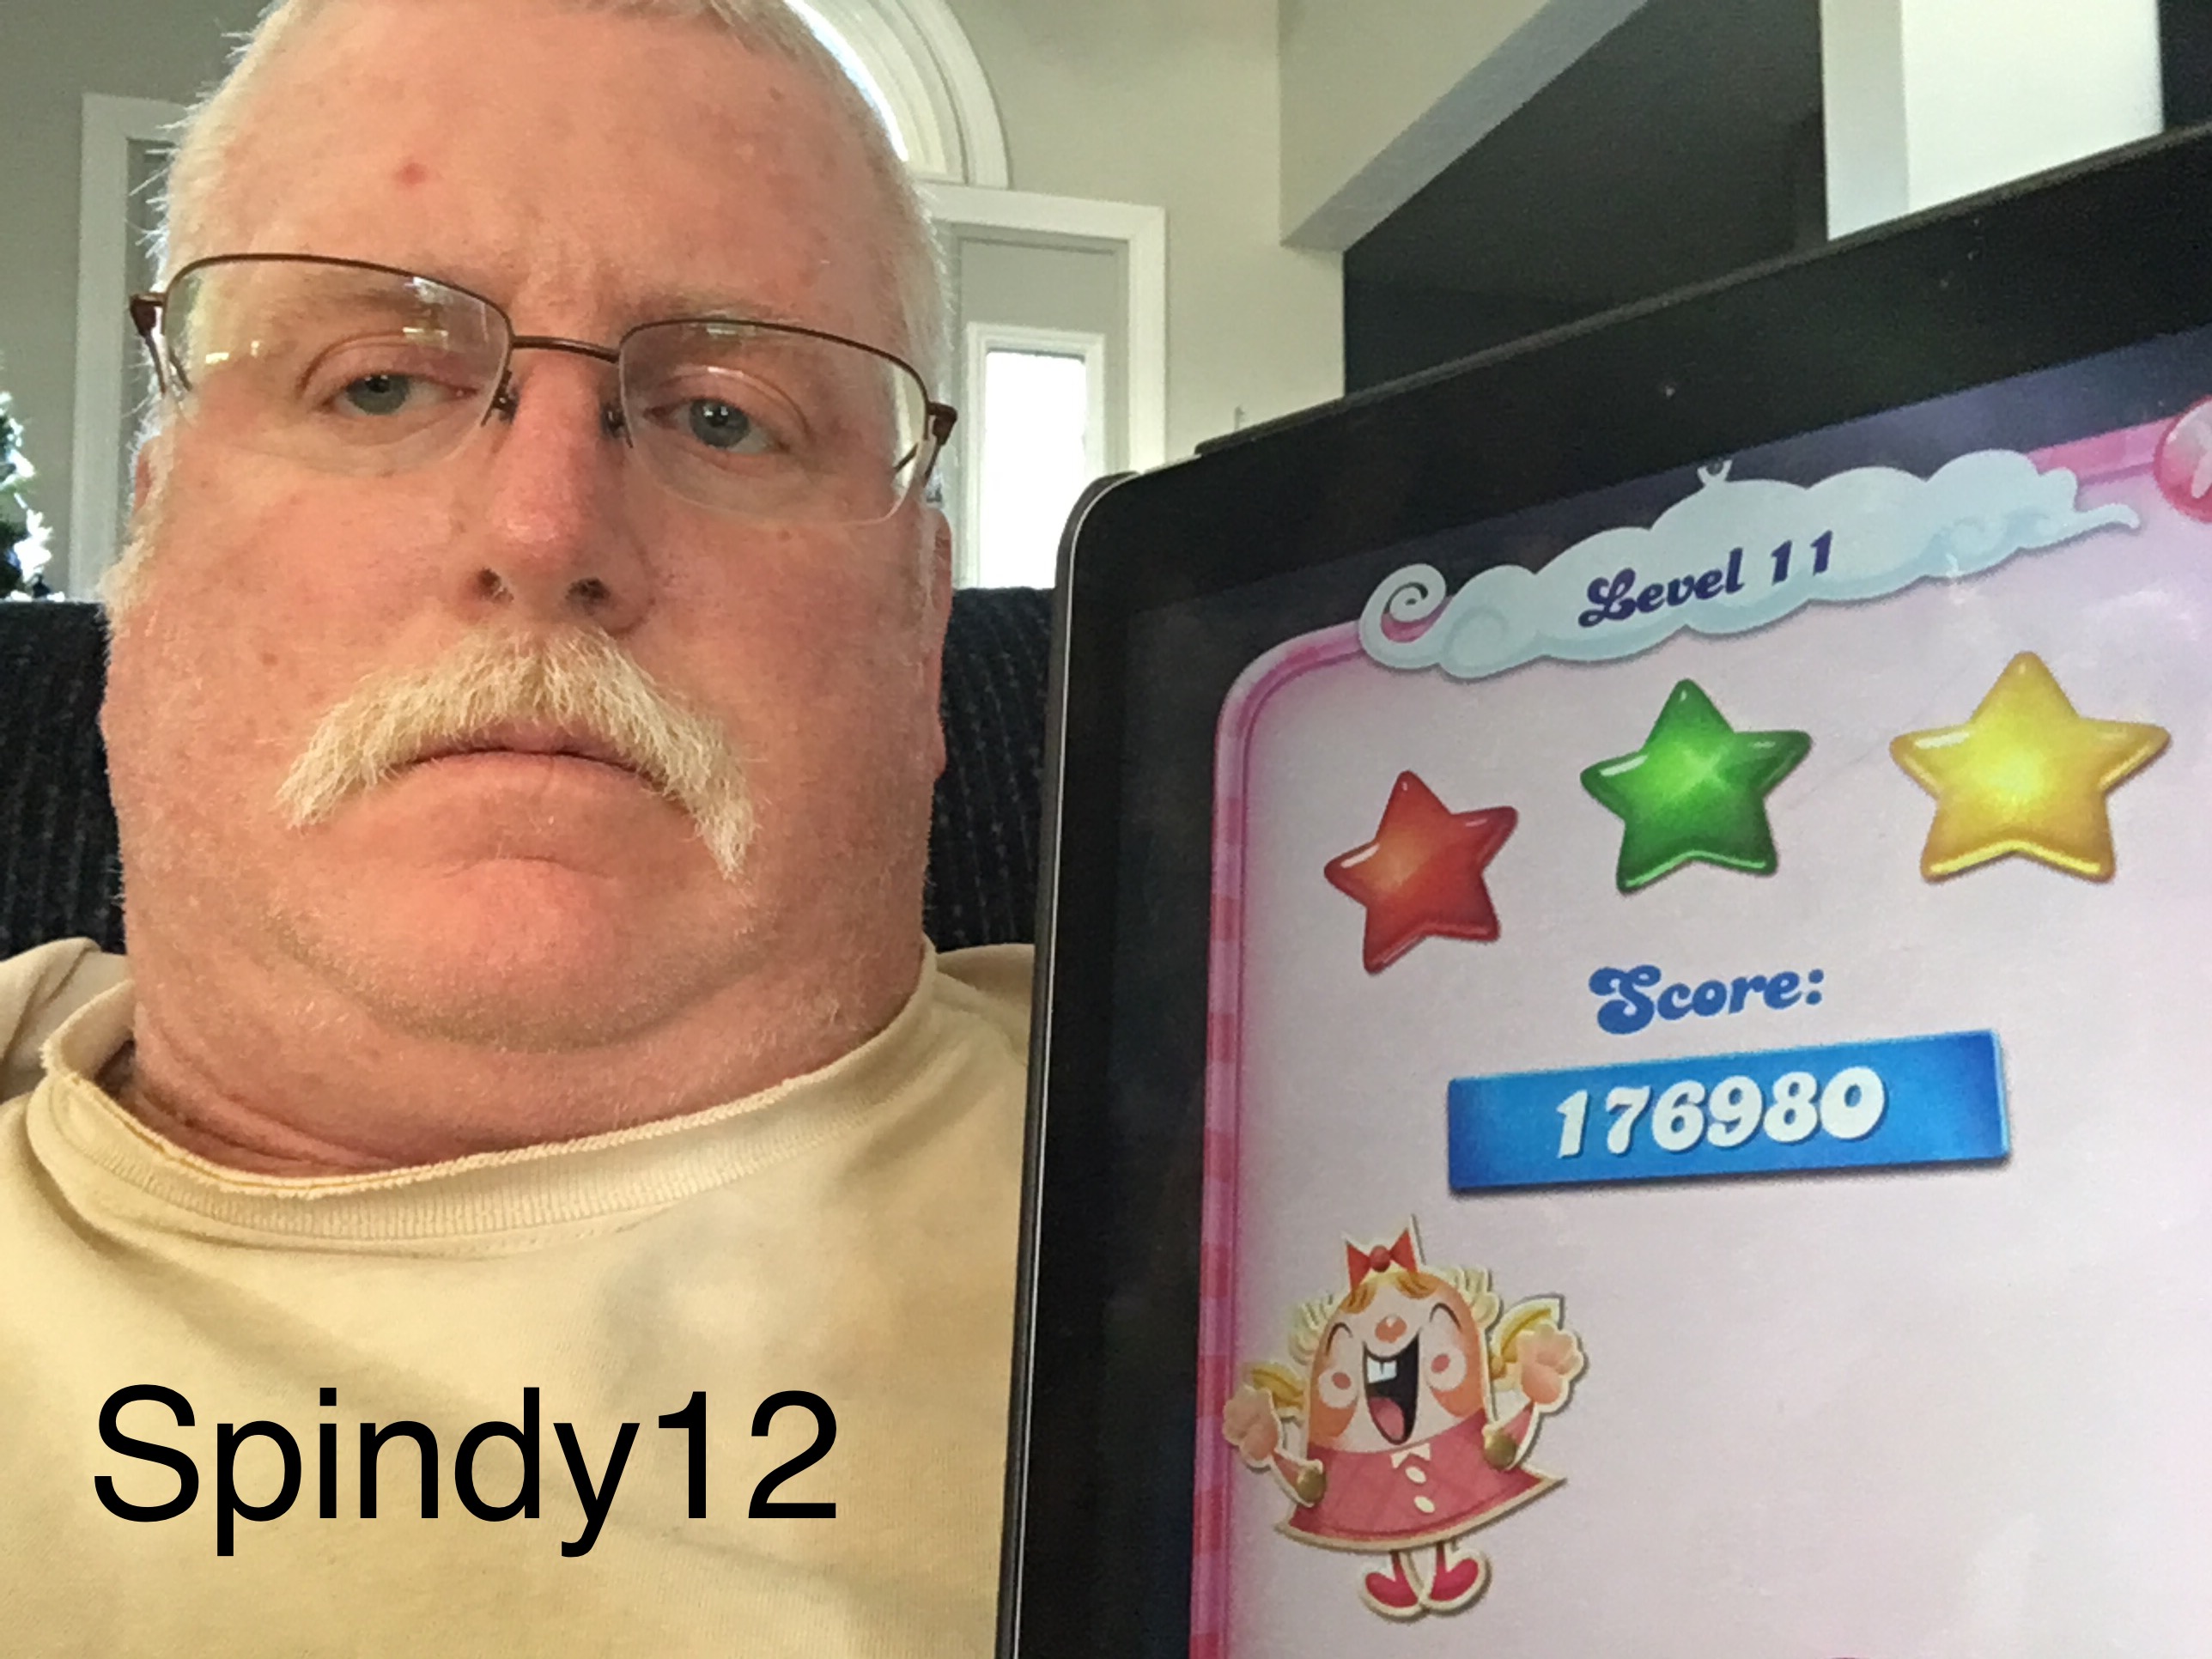 Spindy12: Candy Crush Saga: Level 011 (iOS) 176,980 points on 2016-12-20 15:44:19